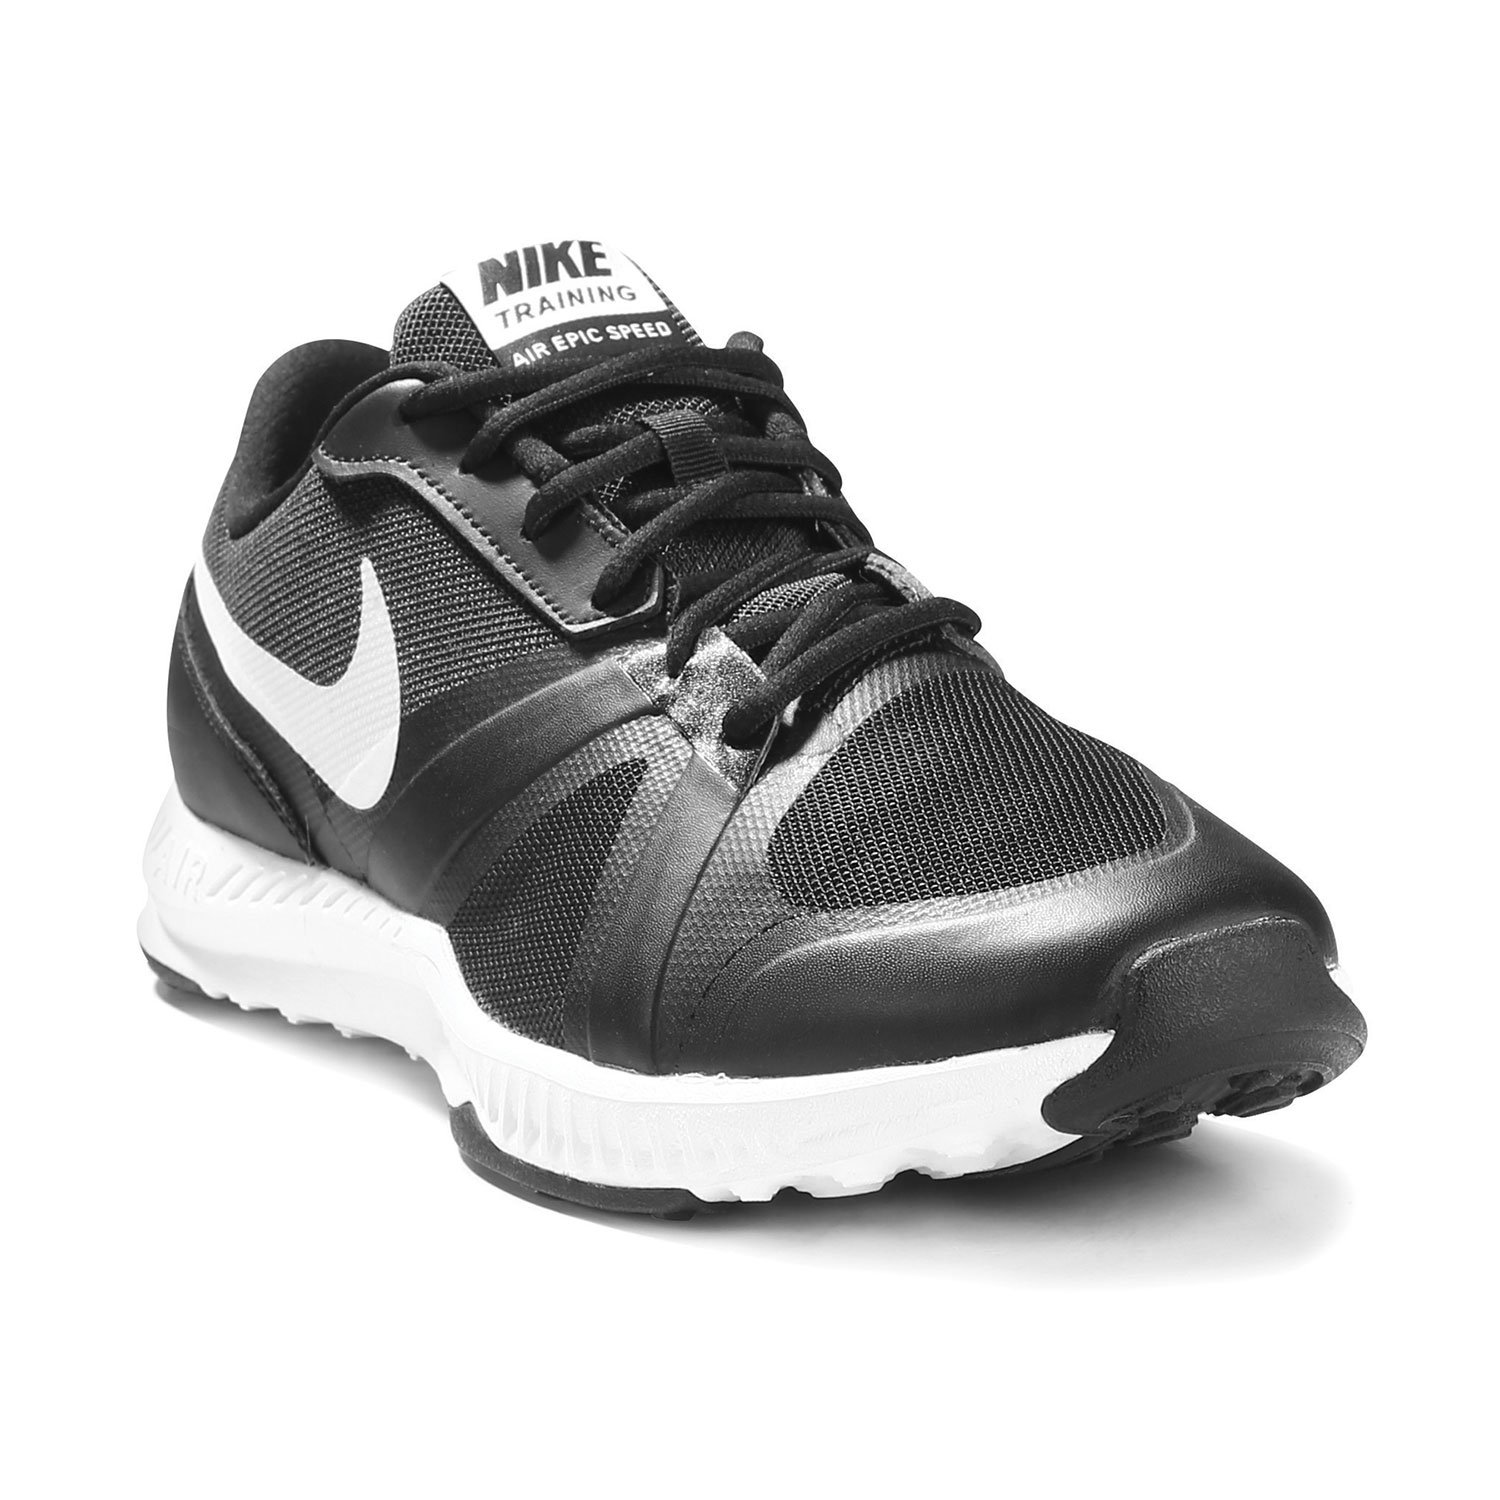 6 Day Nike Air Workout Shoes for push your ABS